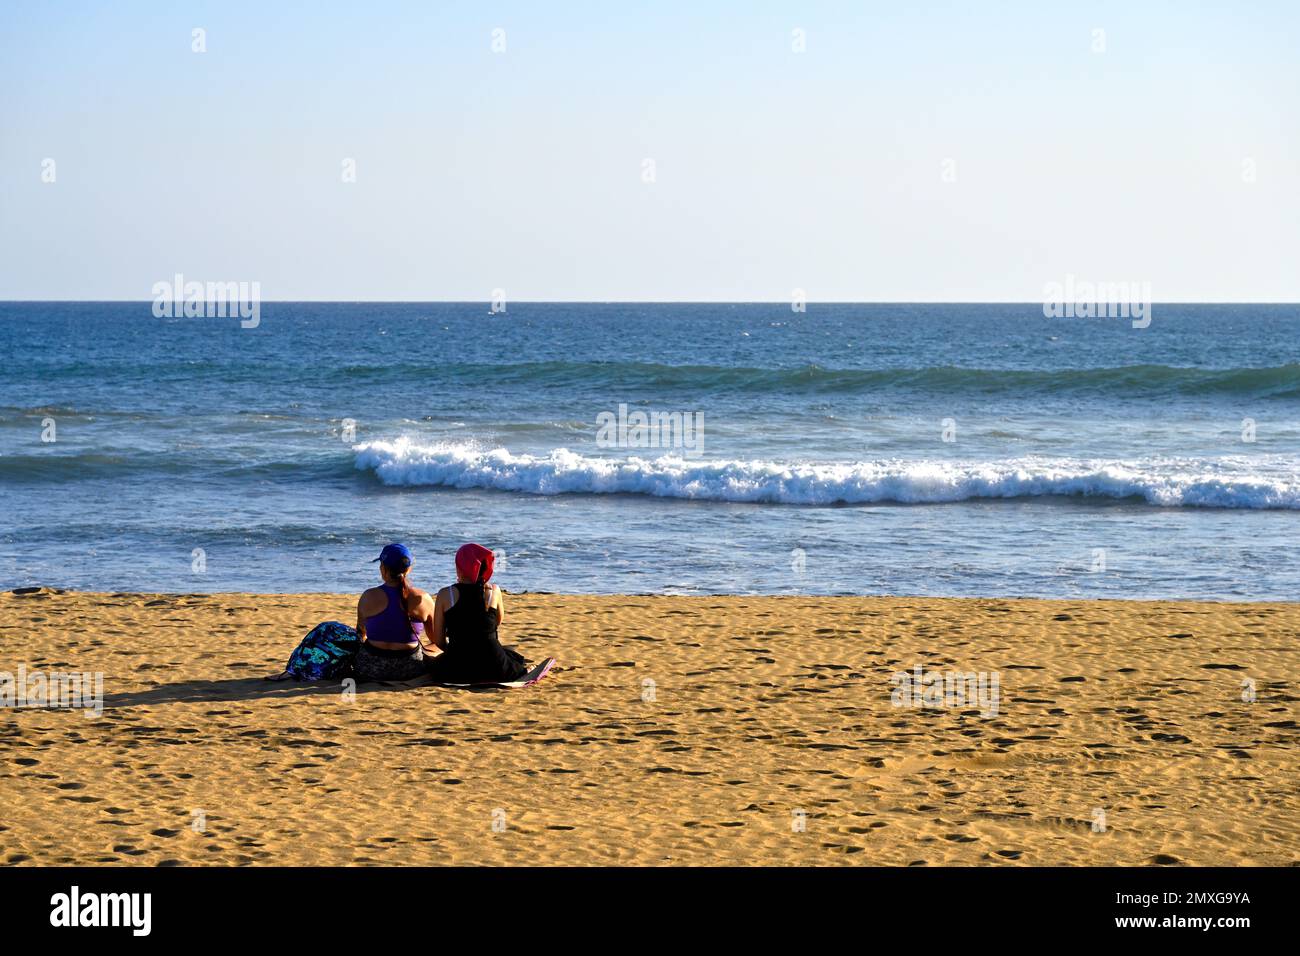 Two people sitting on sandy beach looking out to breaking waves at seaside, Maspalomas, Gran Canaria Stock Photo